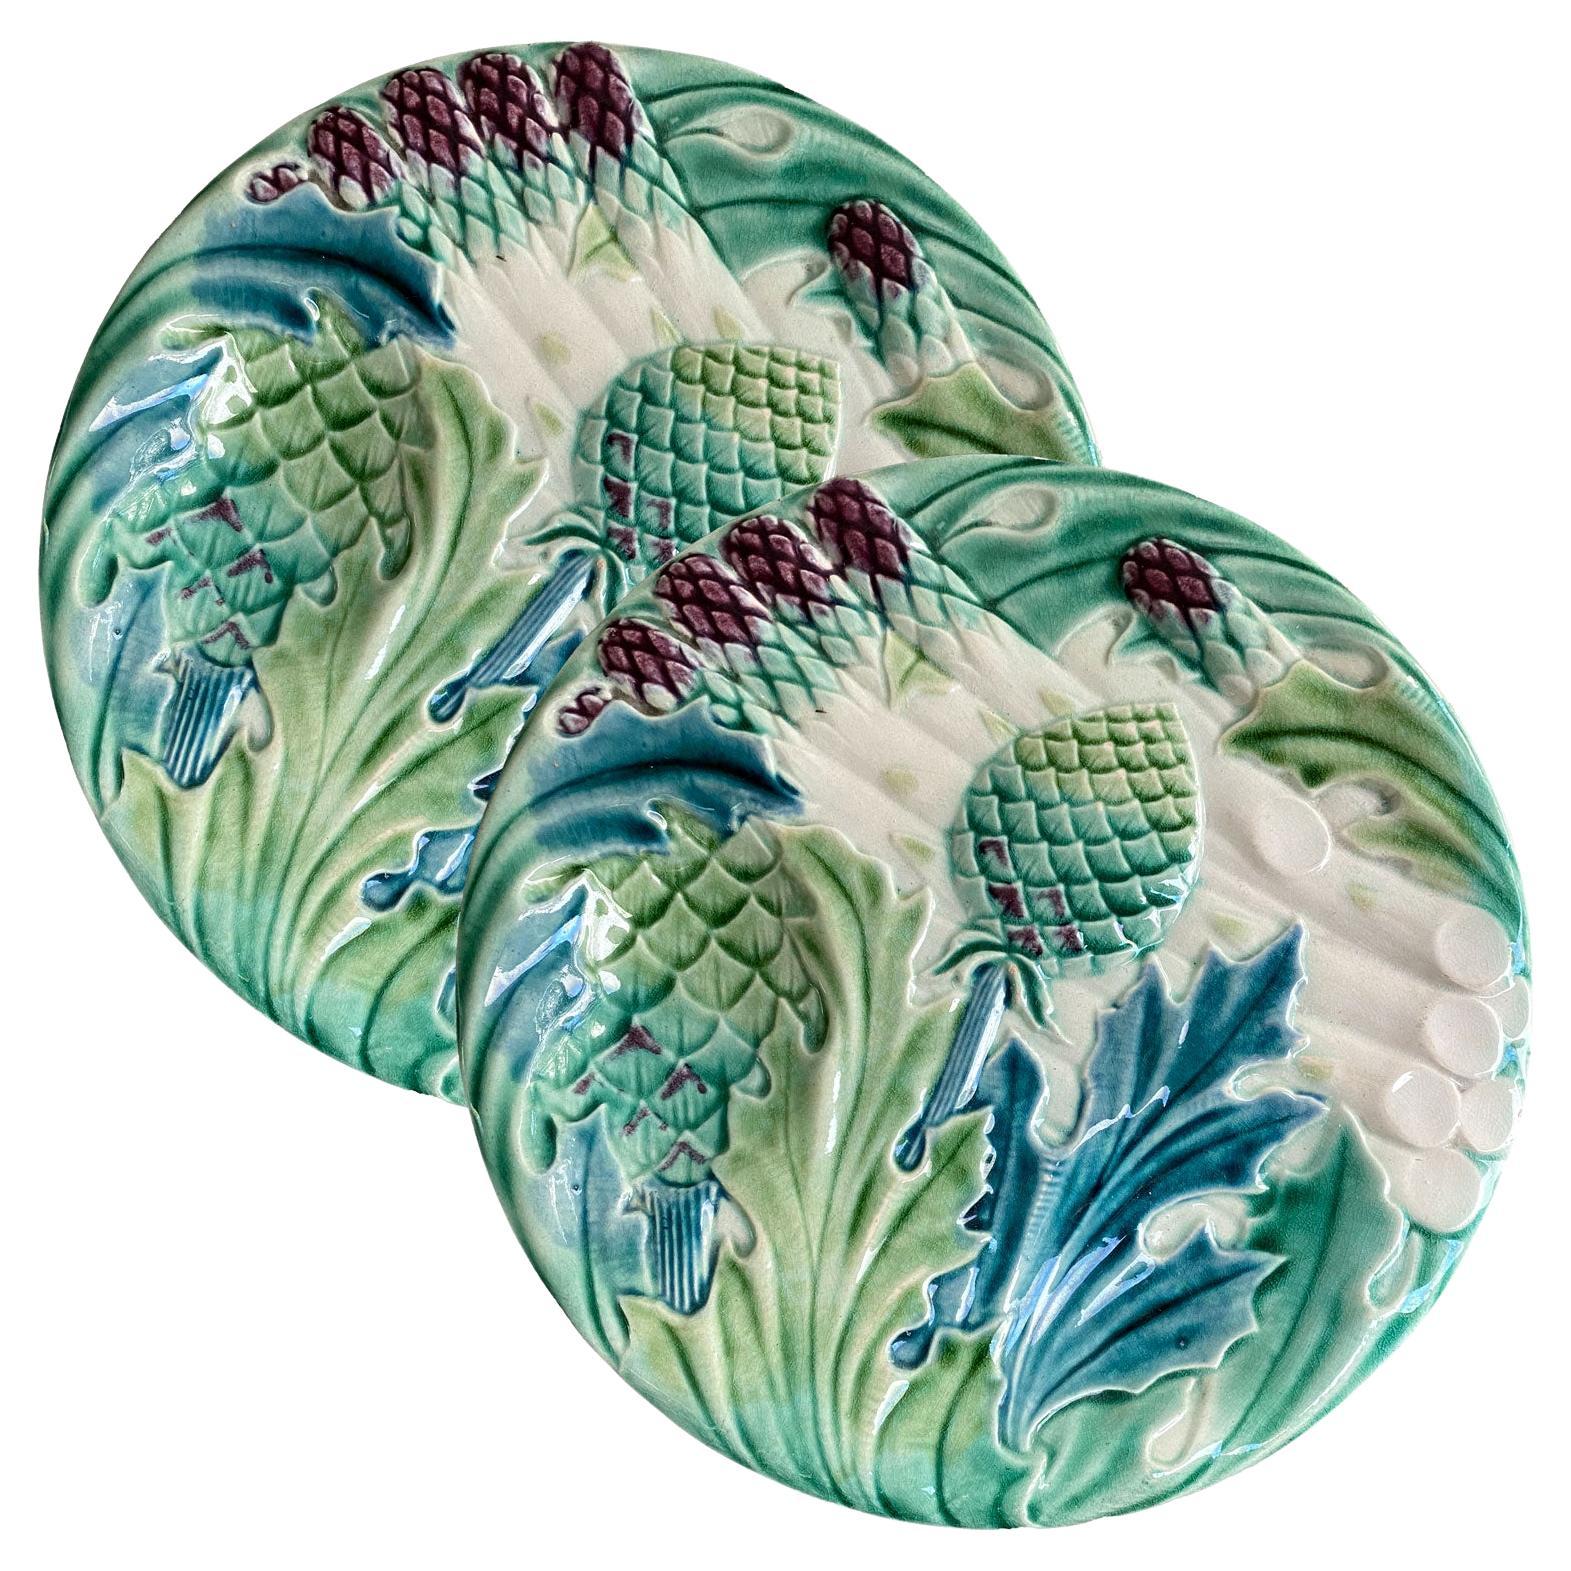 Set of 4 Majolica Asparagus Artichoke Plates French Manufactured by KG Luneville For Sale